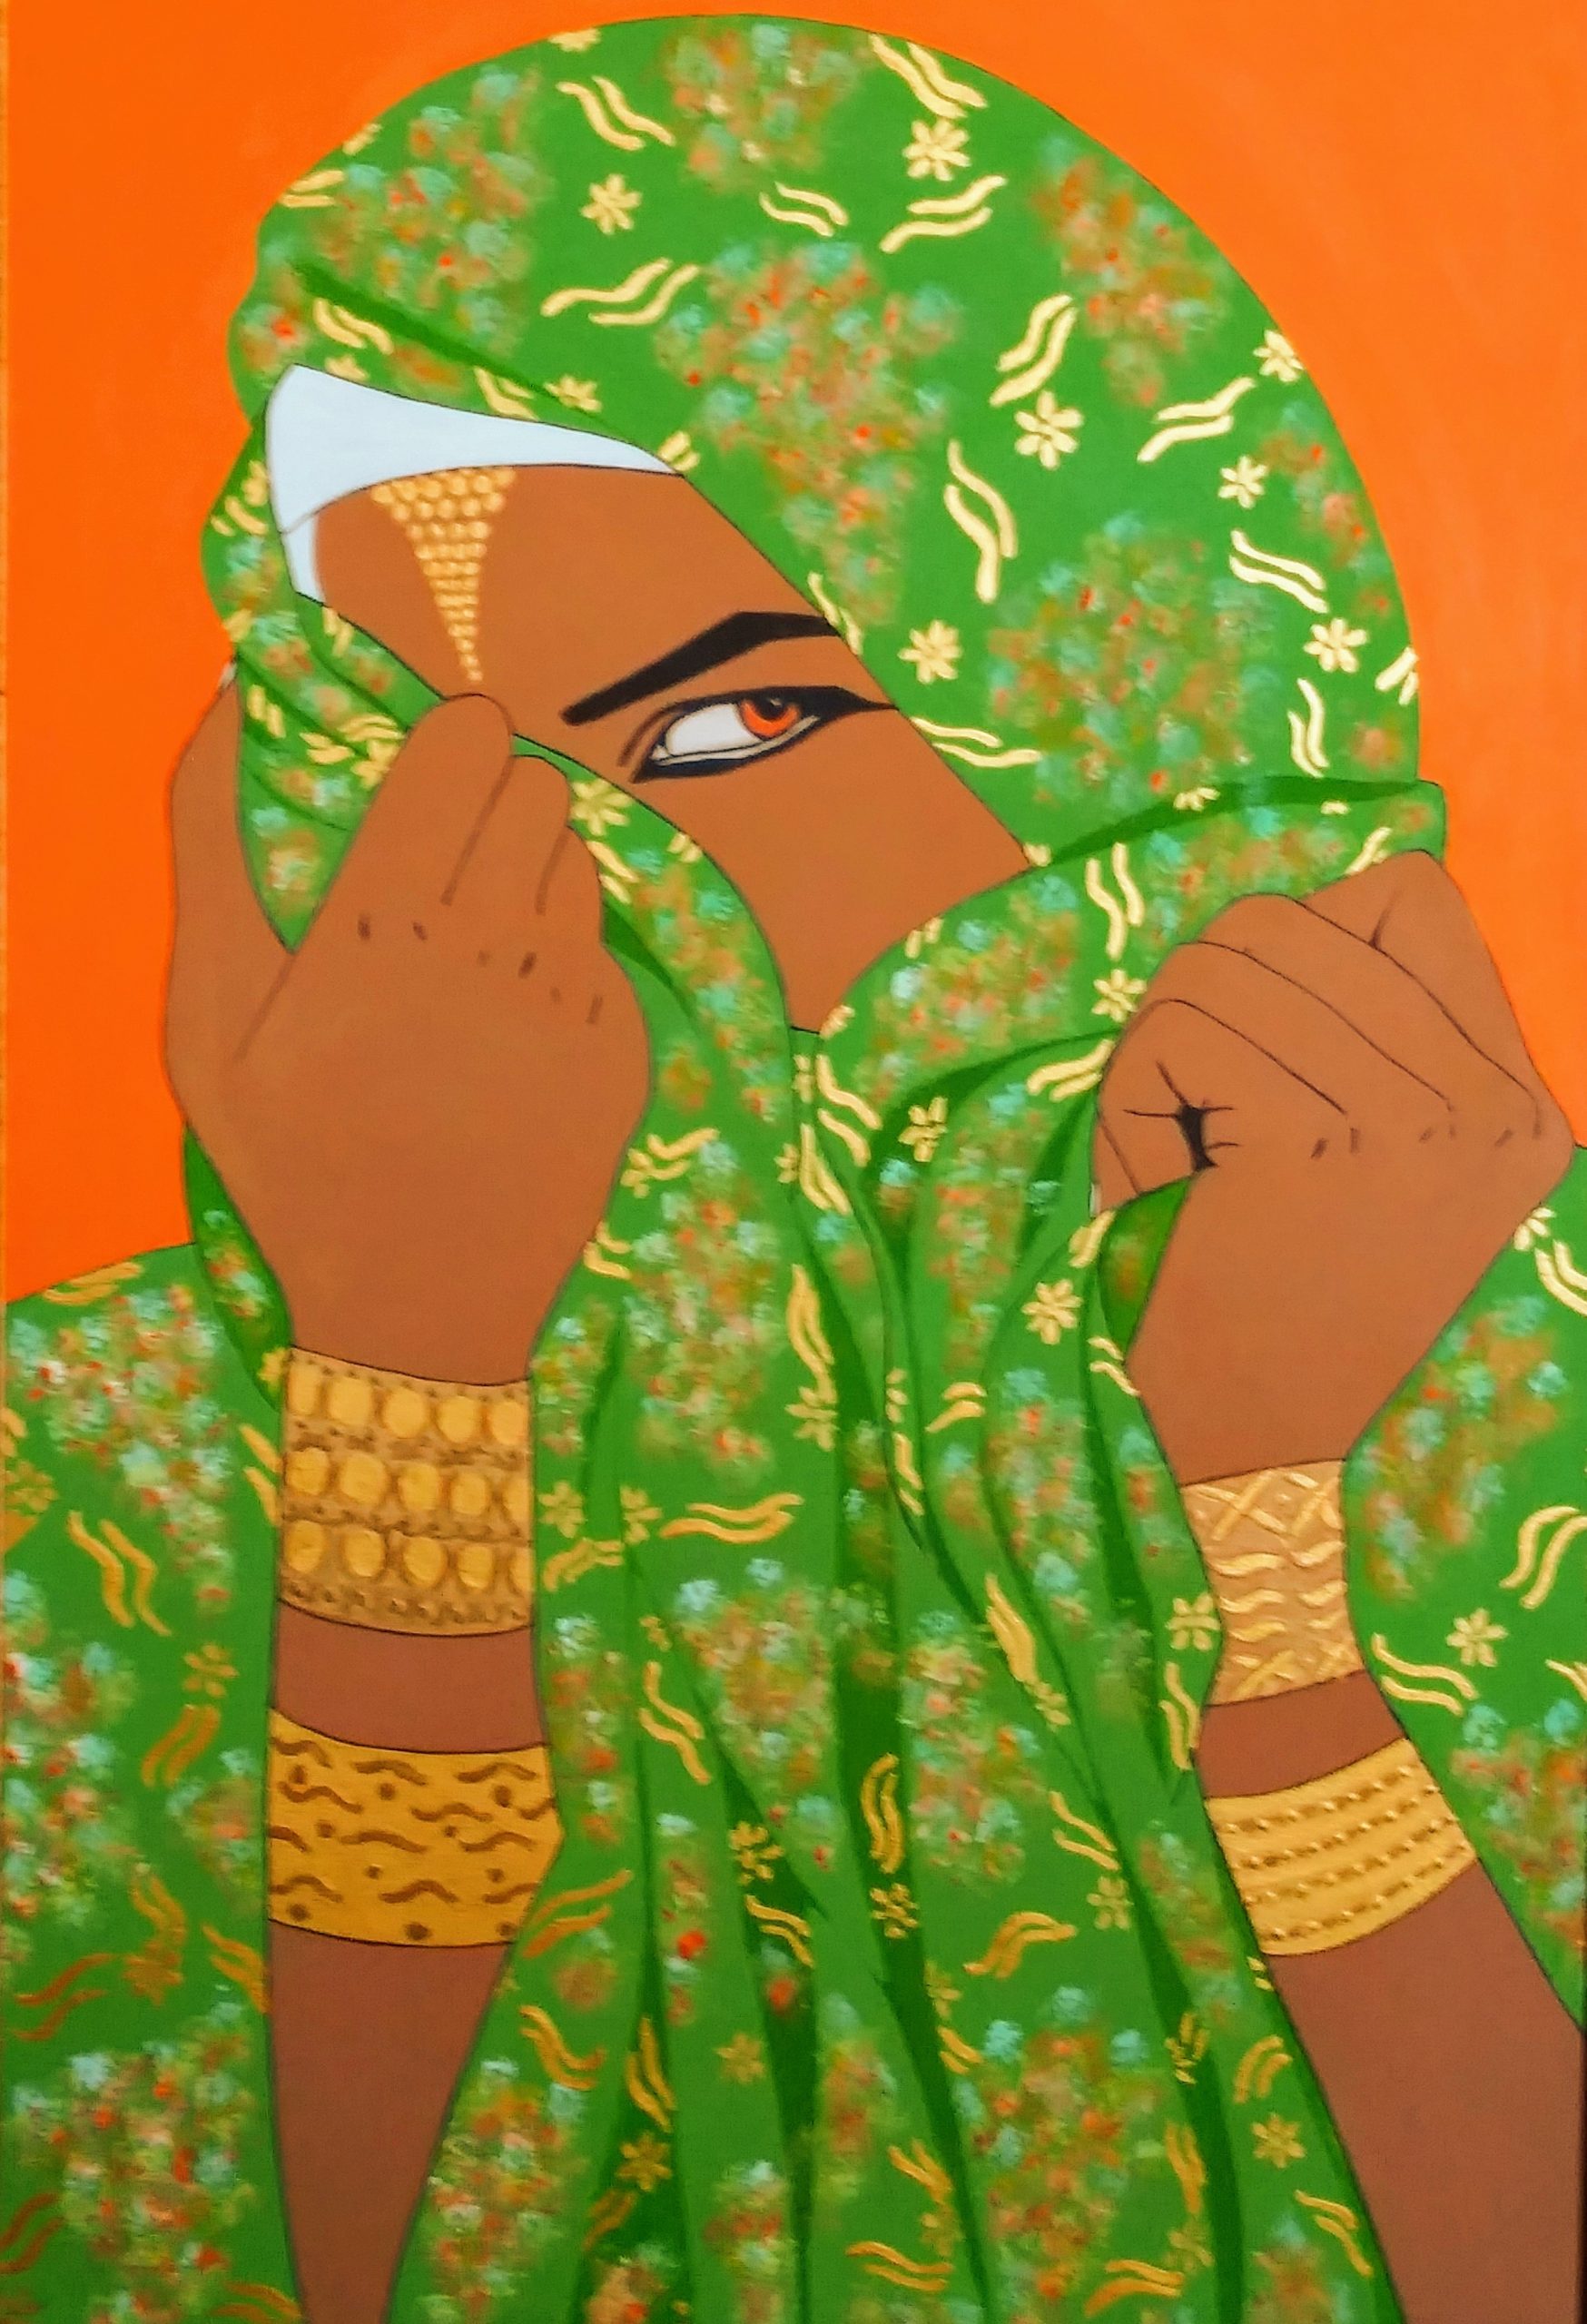 A beautiful woman is wrapped in a glittering green scarf with only one kohl lined eye peering out at the viewer. Gold cuffs adorn both of her wrists as she holds gently onto the scarf